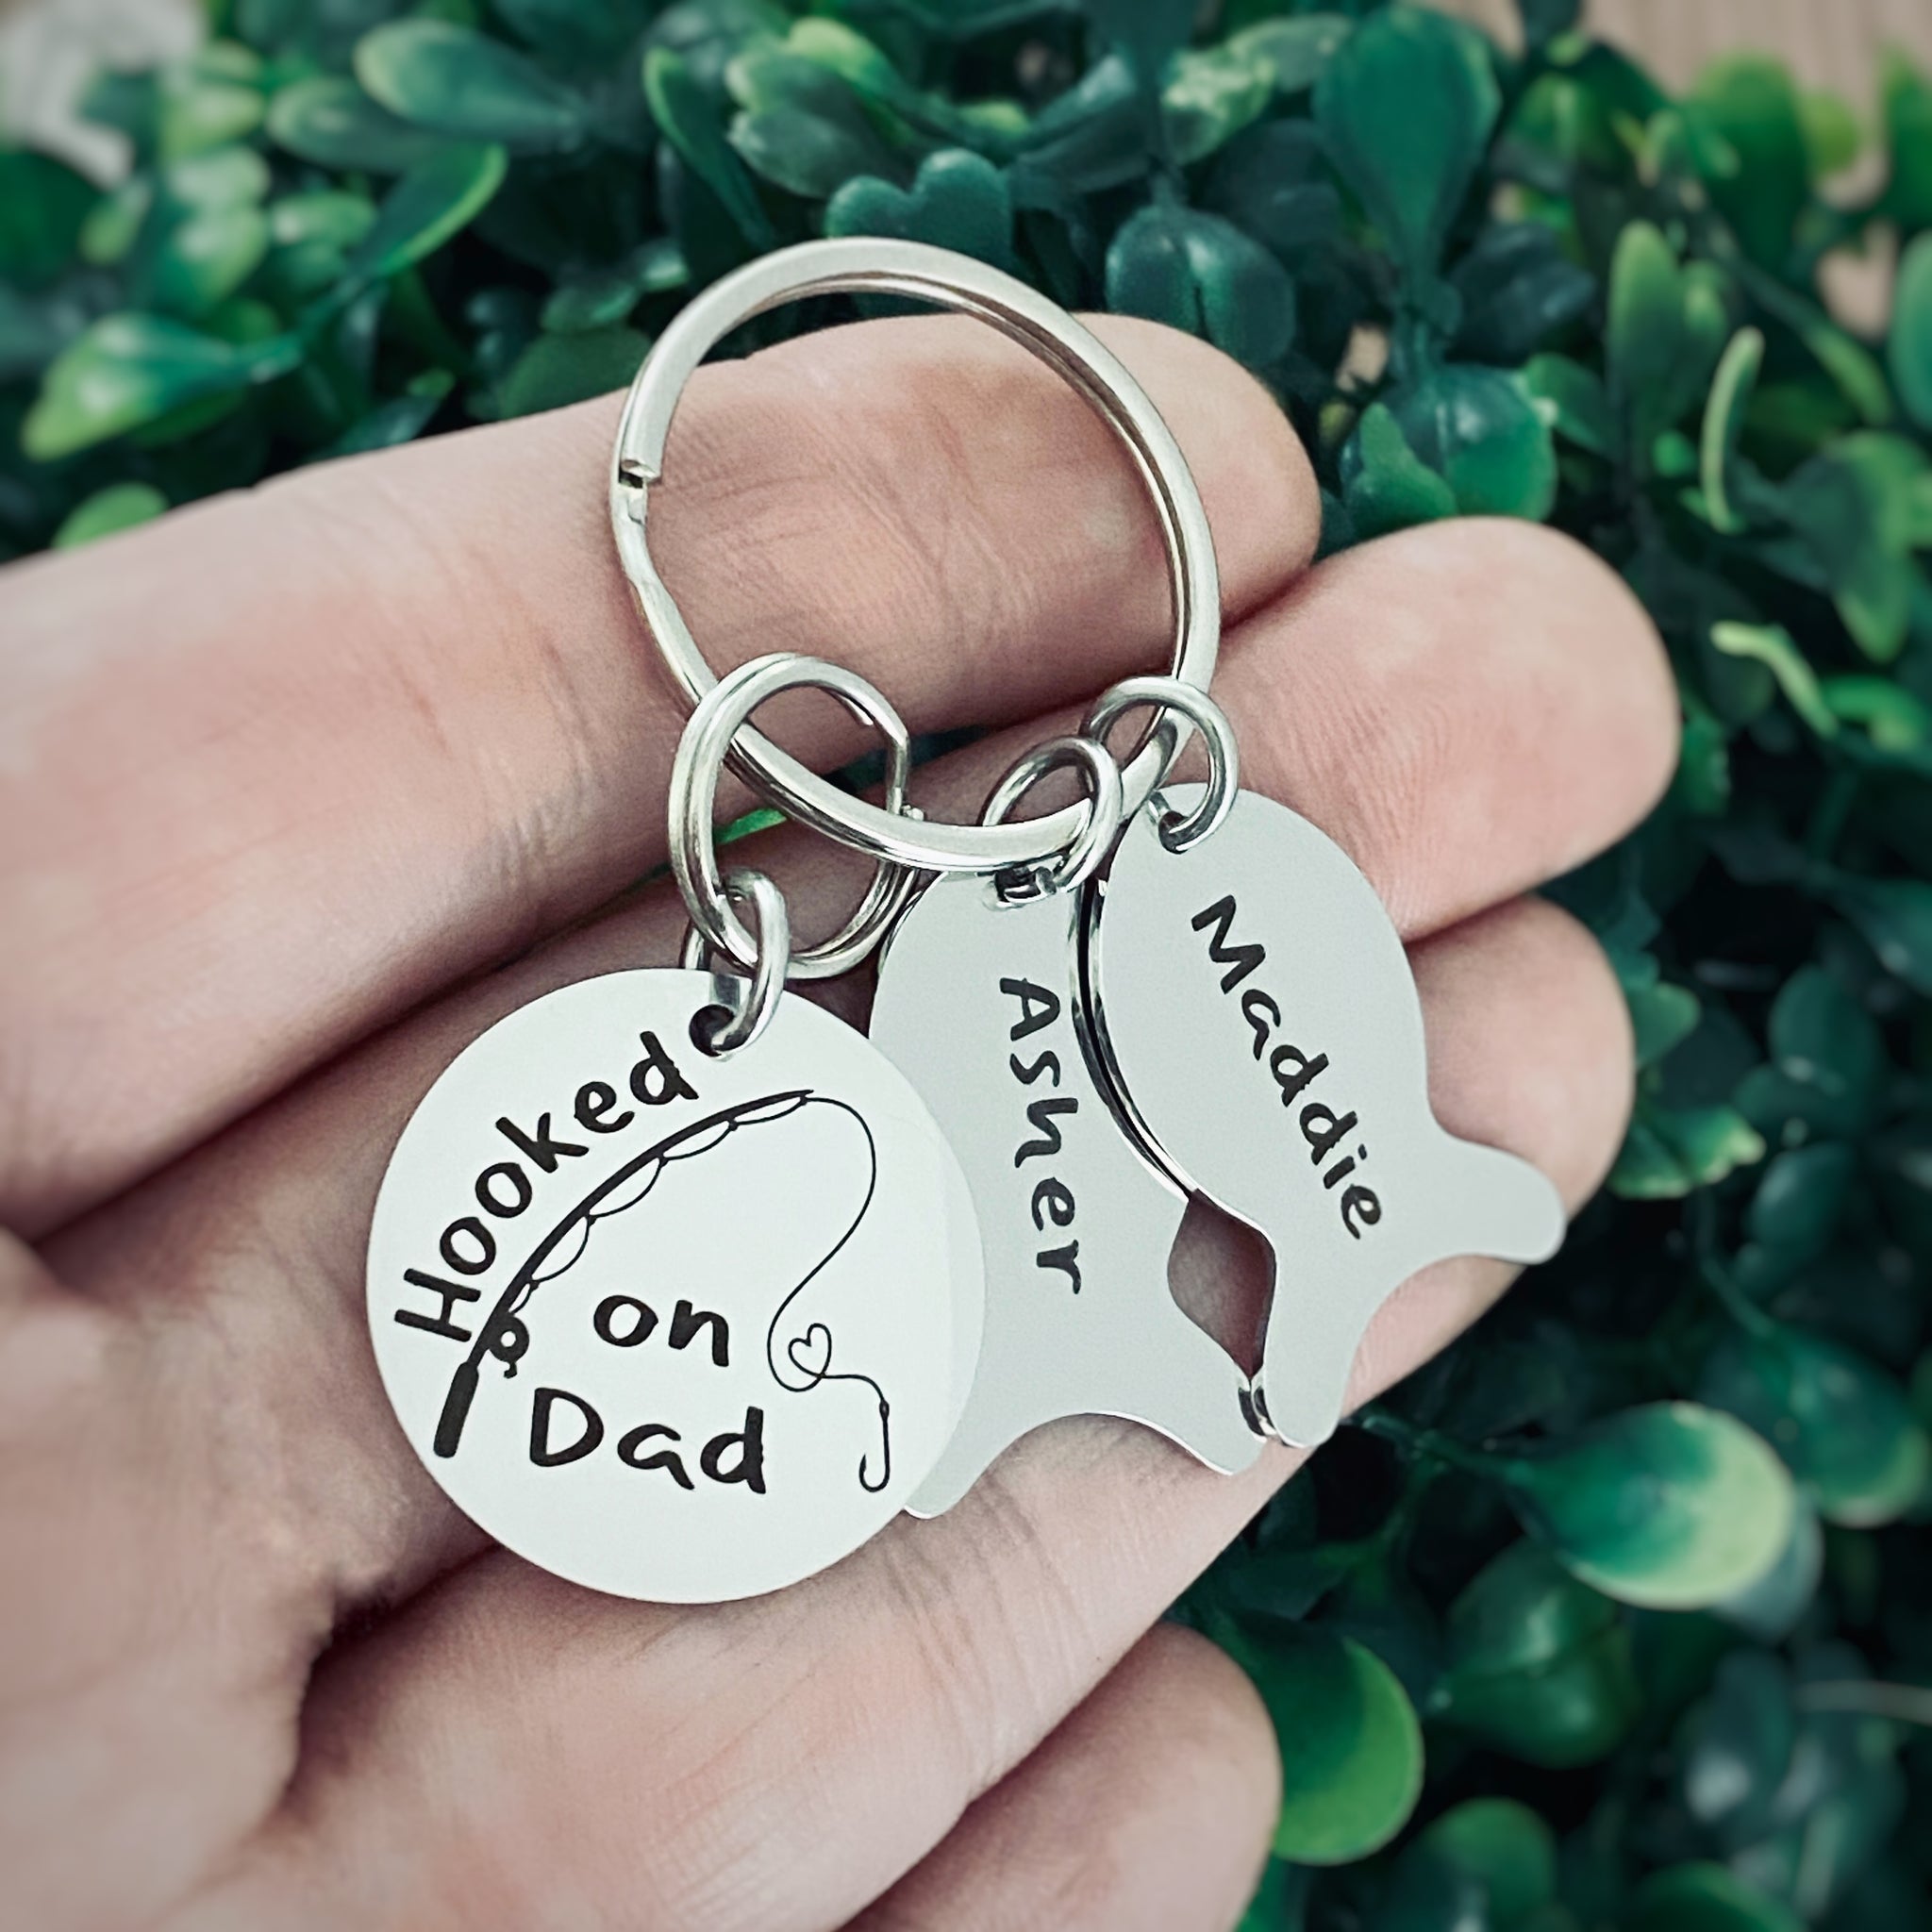 Father's Day Gift Ideas,Personalized Fishing Keychain with 2-8